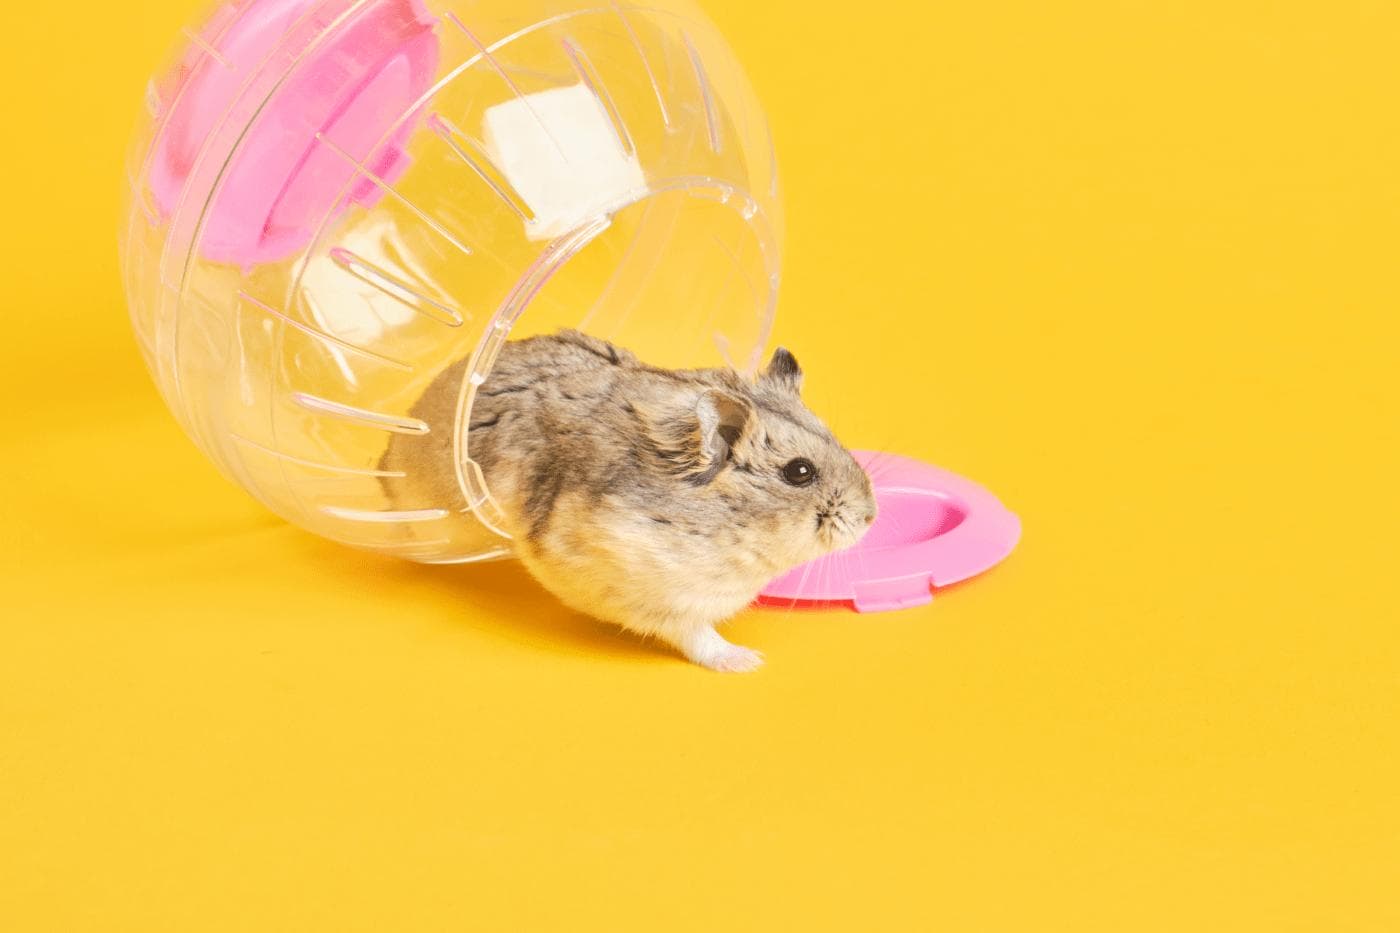 Hamster Ball on Review: The Pros and Cons